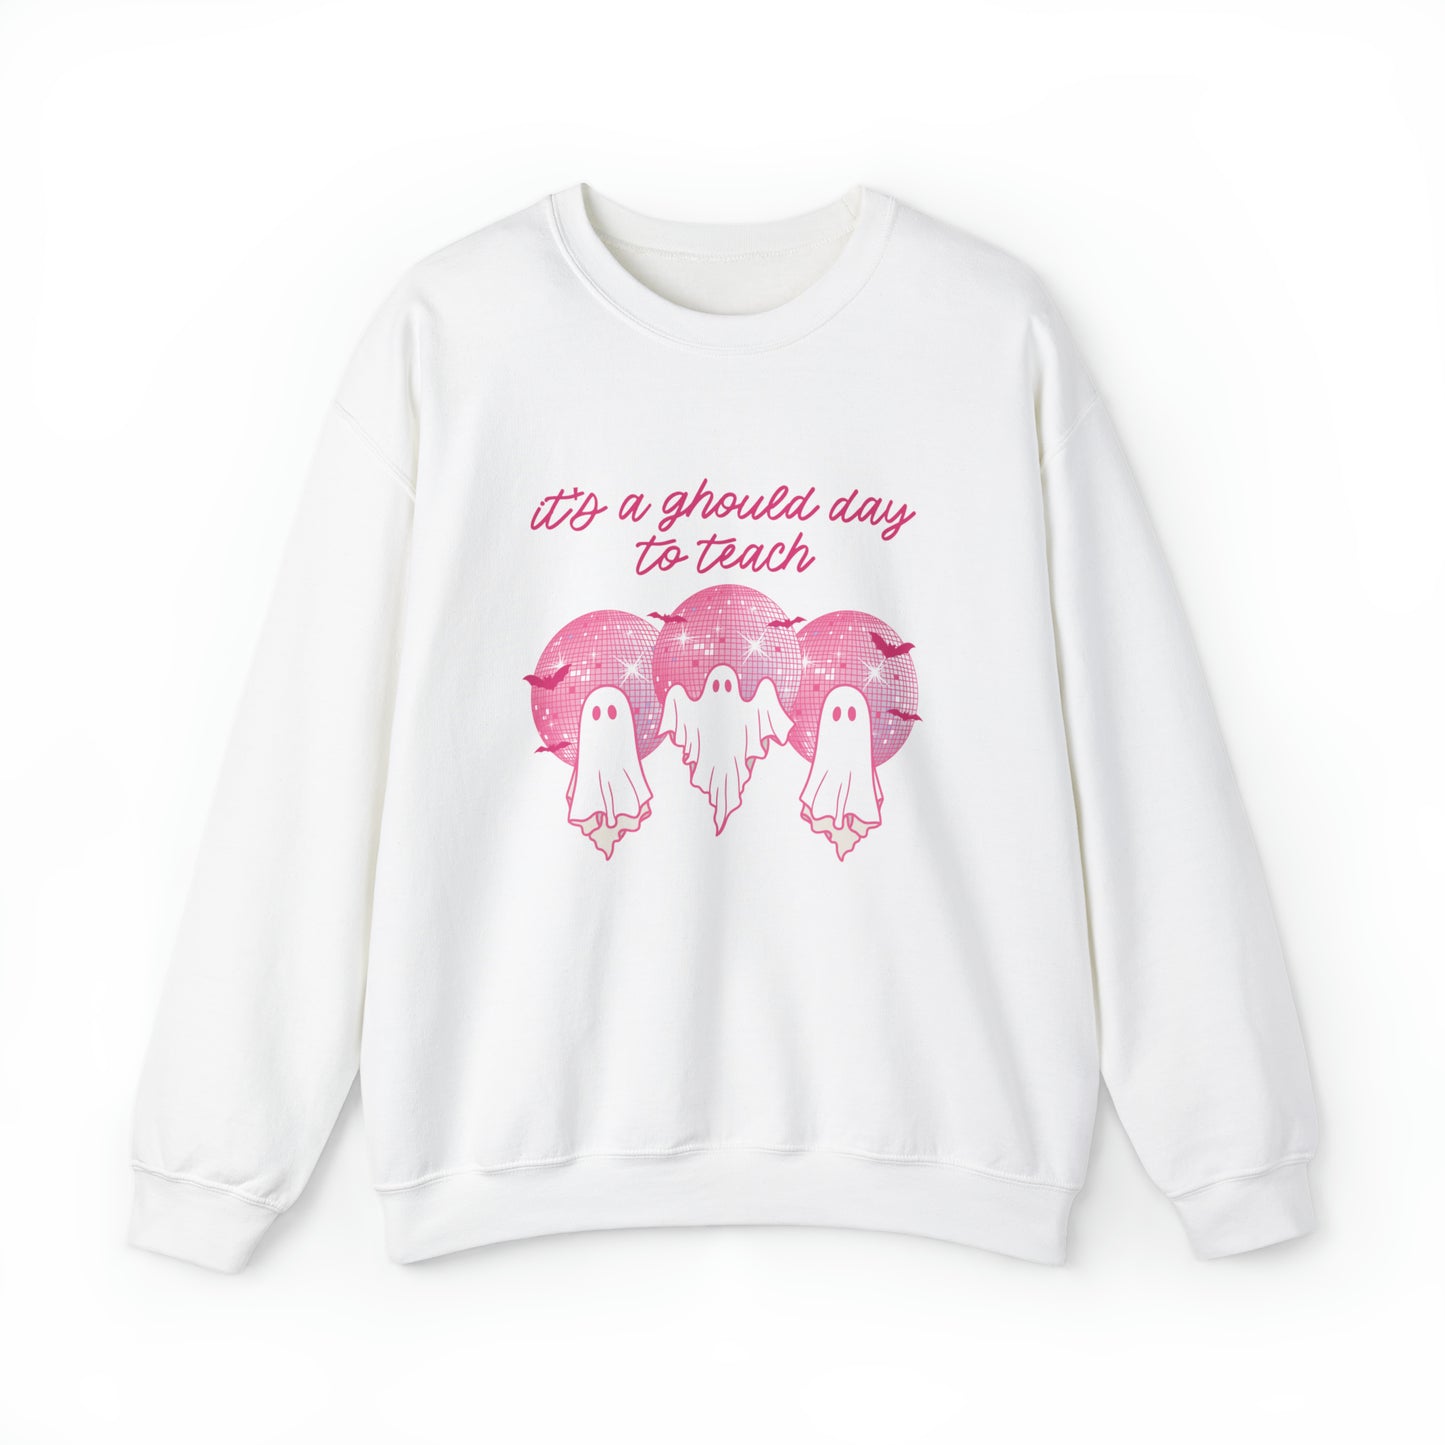 It's a Ghould Day to Teach Crewneck Sweatshirt